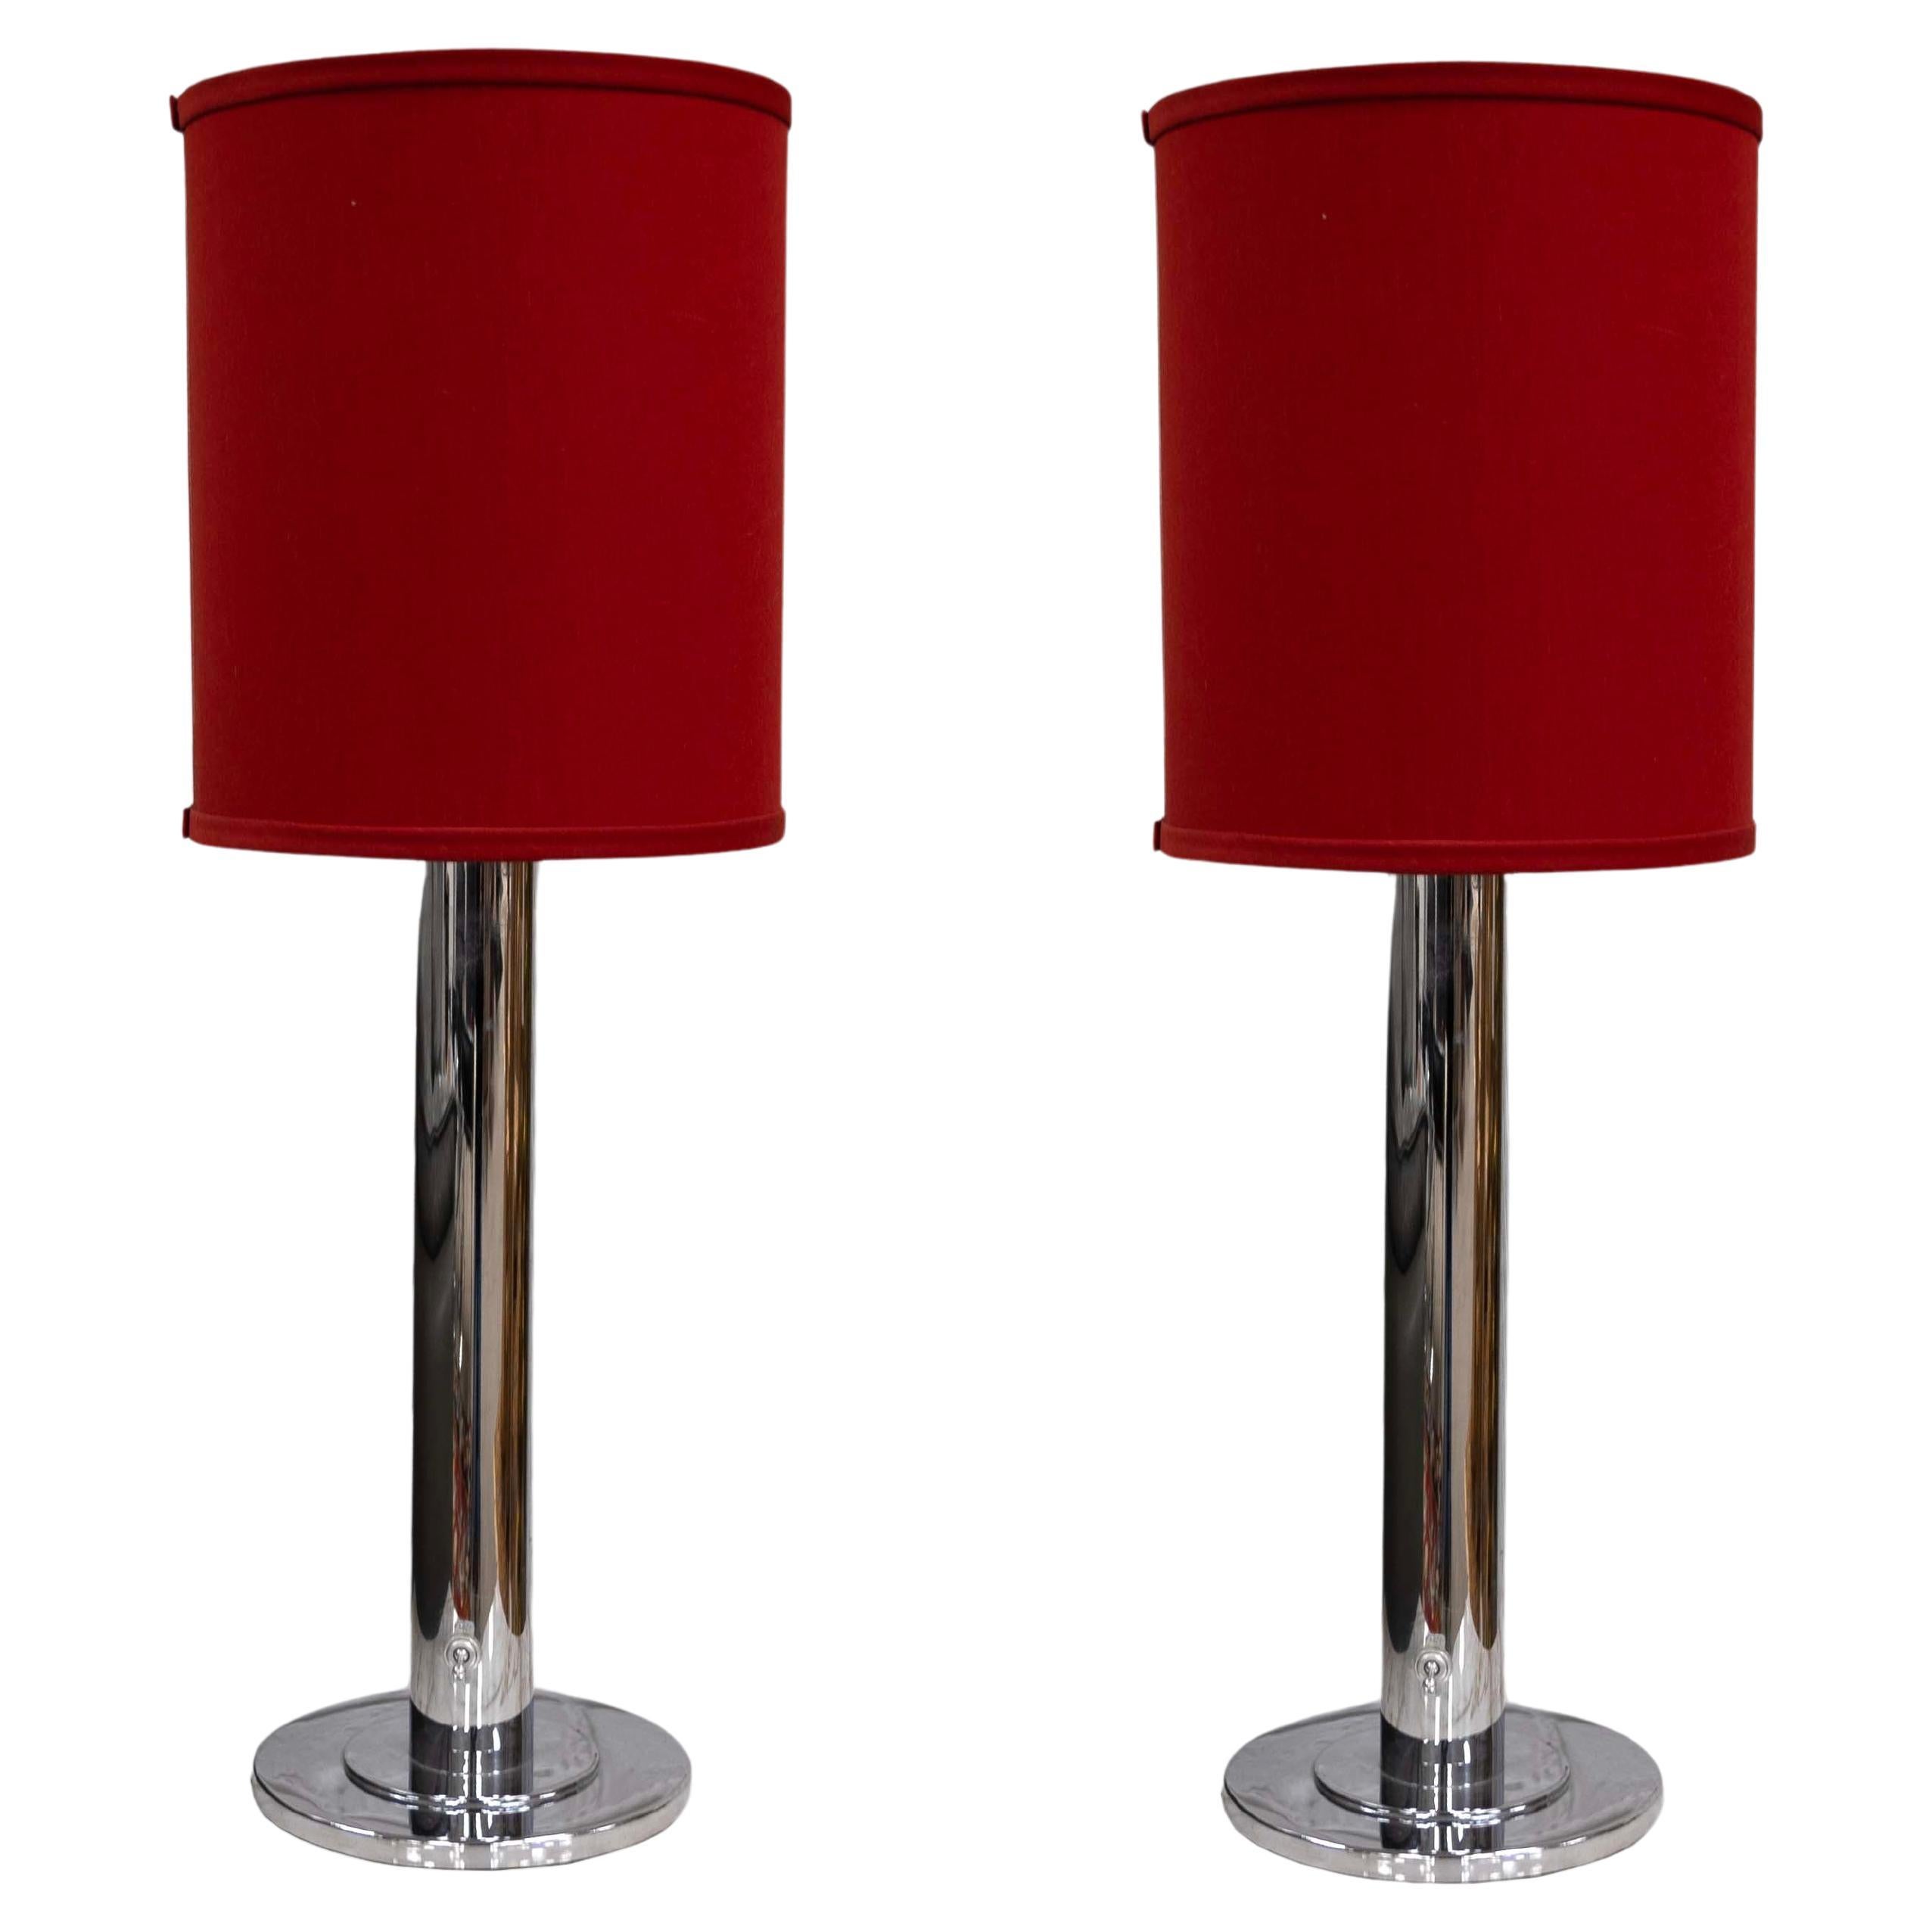 Pair of Nessen Lighting Chrome Table Lamps with Red Shades Contemporary Modern For Sale